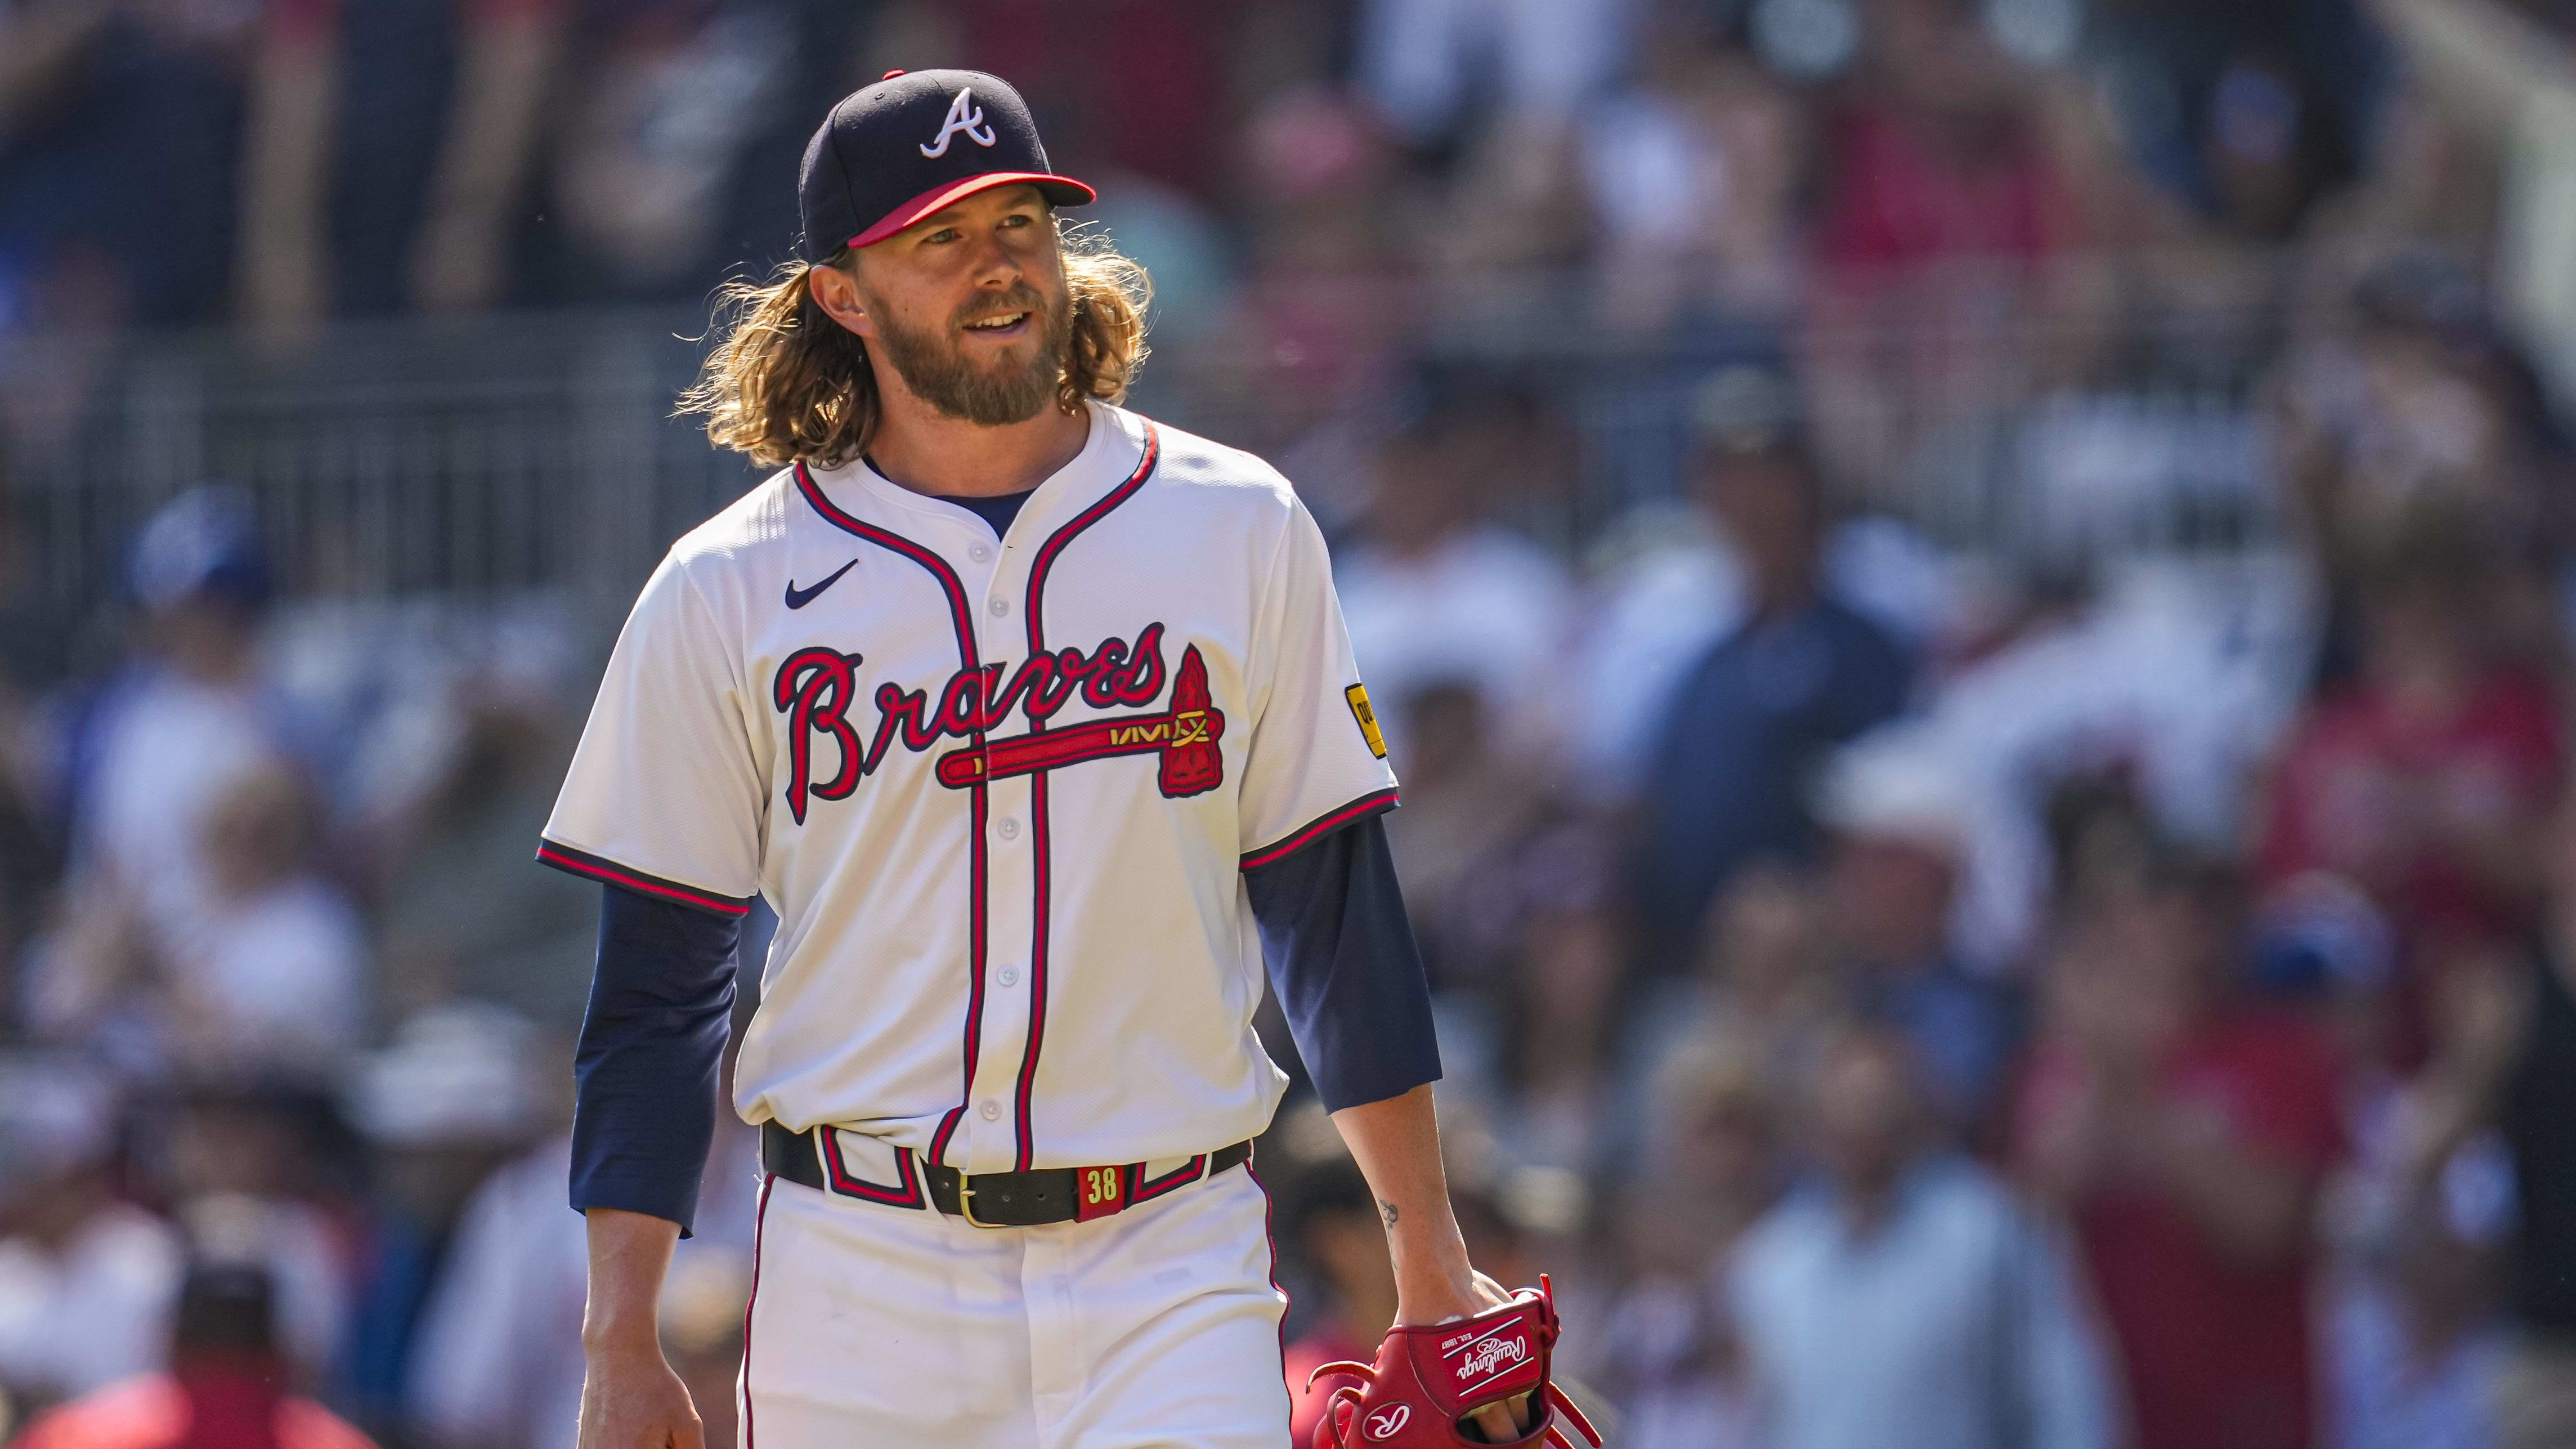 Braves Lose Key Reliever to Injured List with Elbow Inflammation